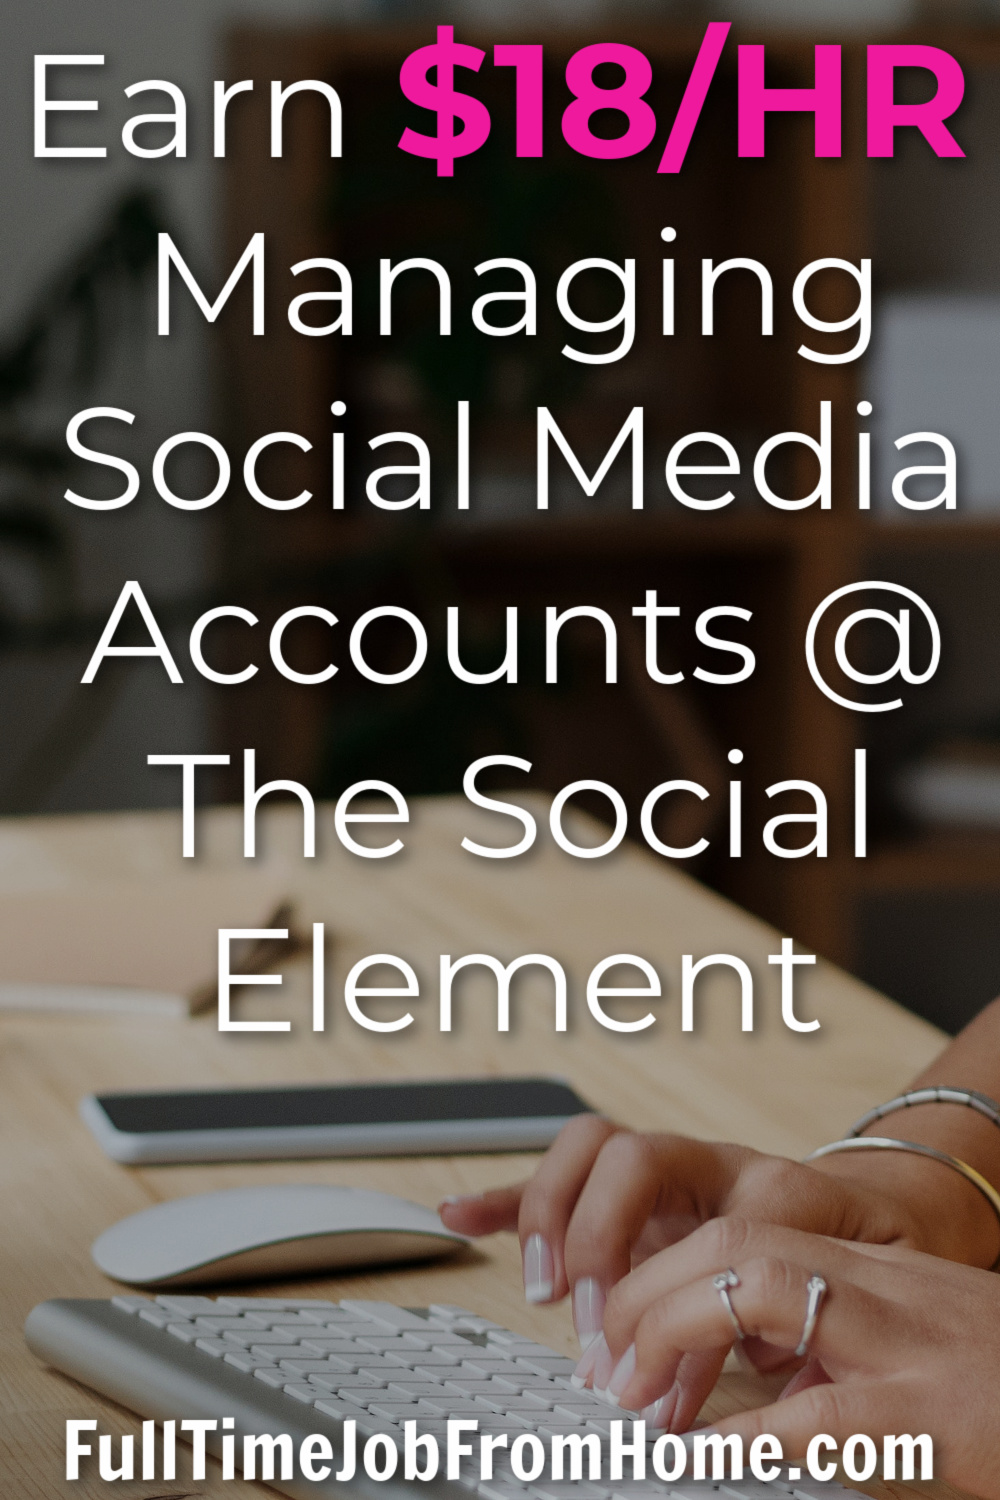 Learn How YOU can work at home managing popular companies social media accounts and earn up to $18/HR with The Social Element